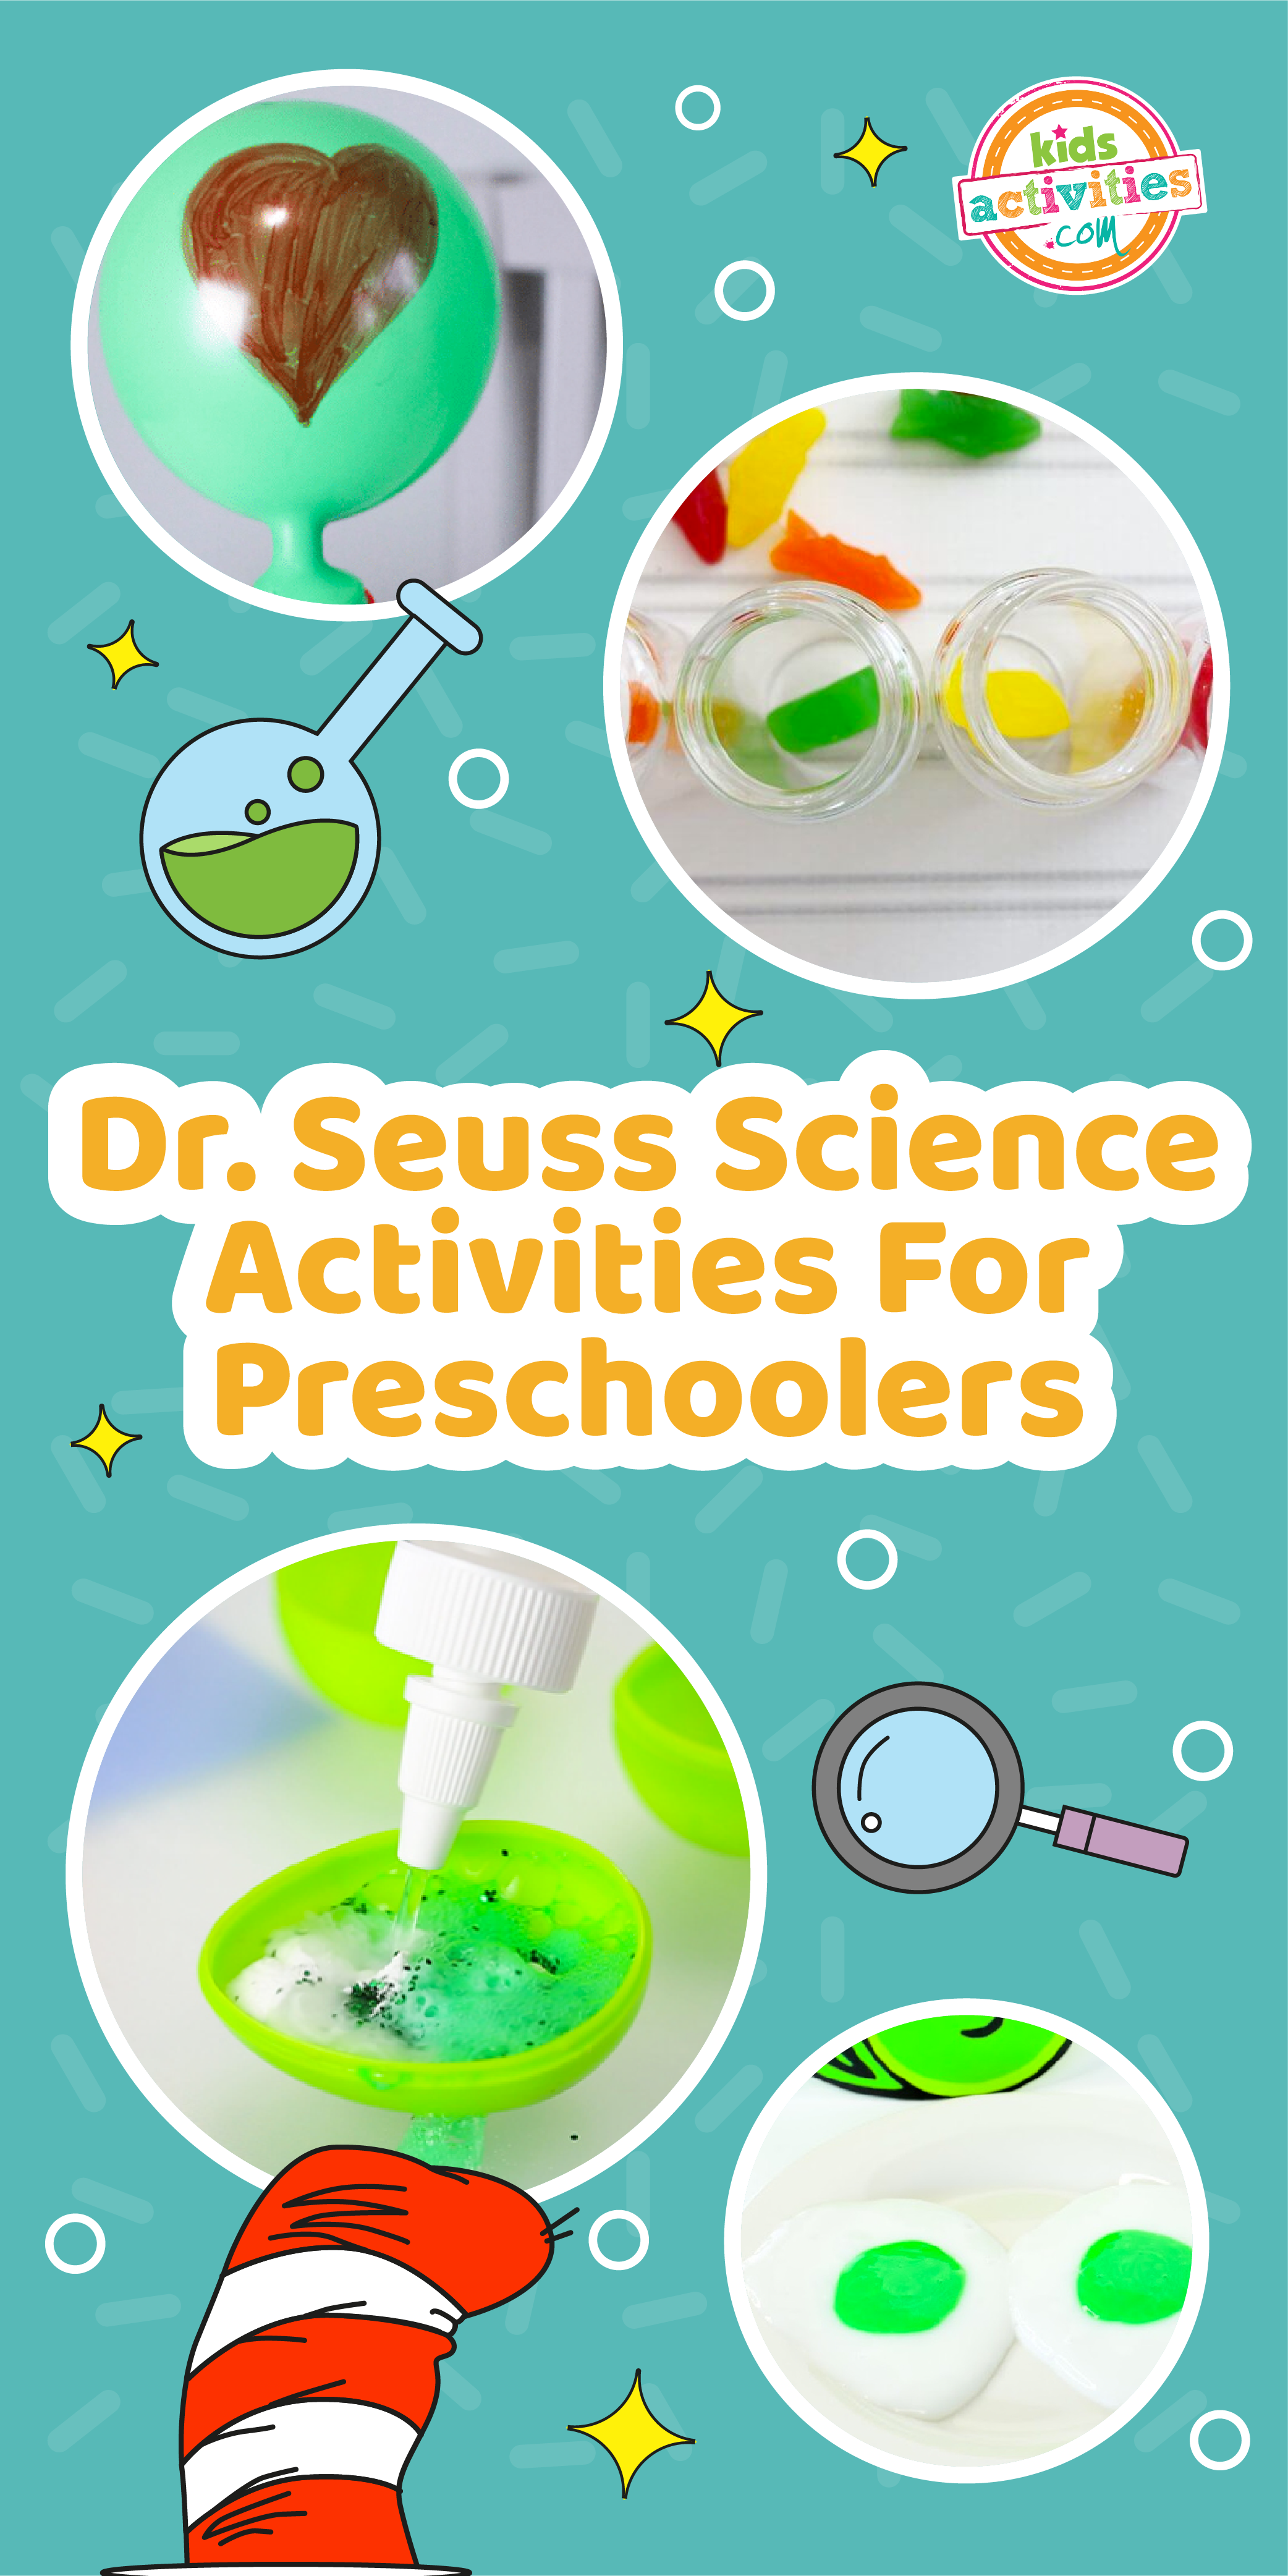 Image shows a compilation of different dr. seuss science activities for preschoolers. 